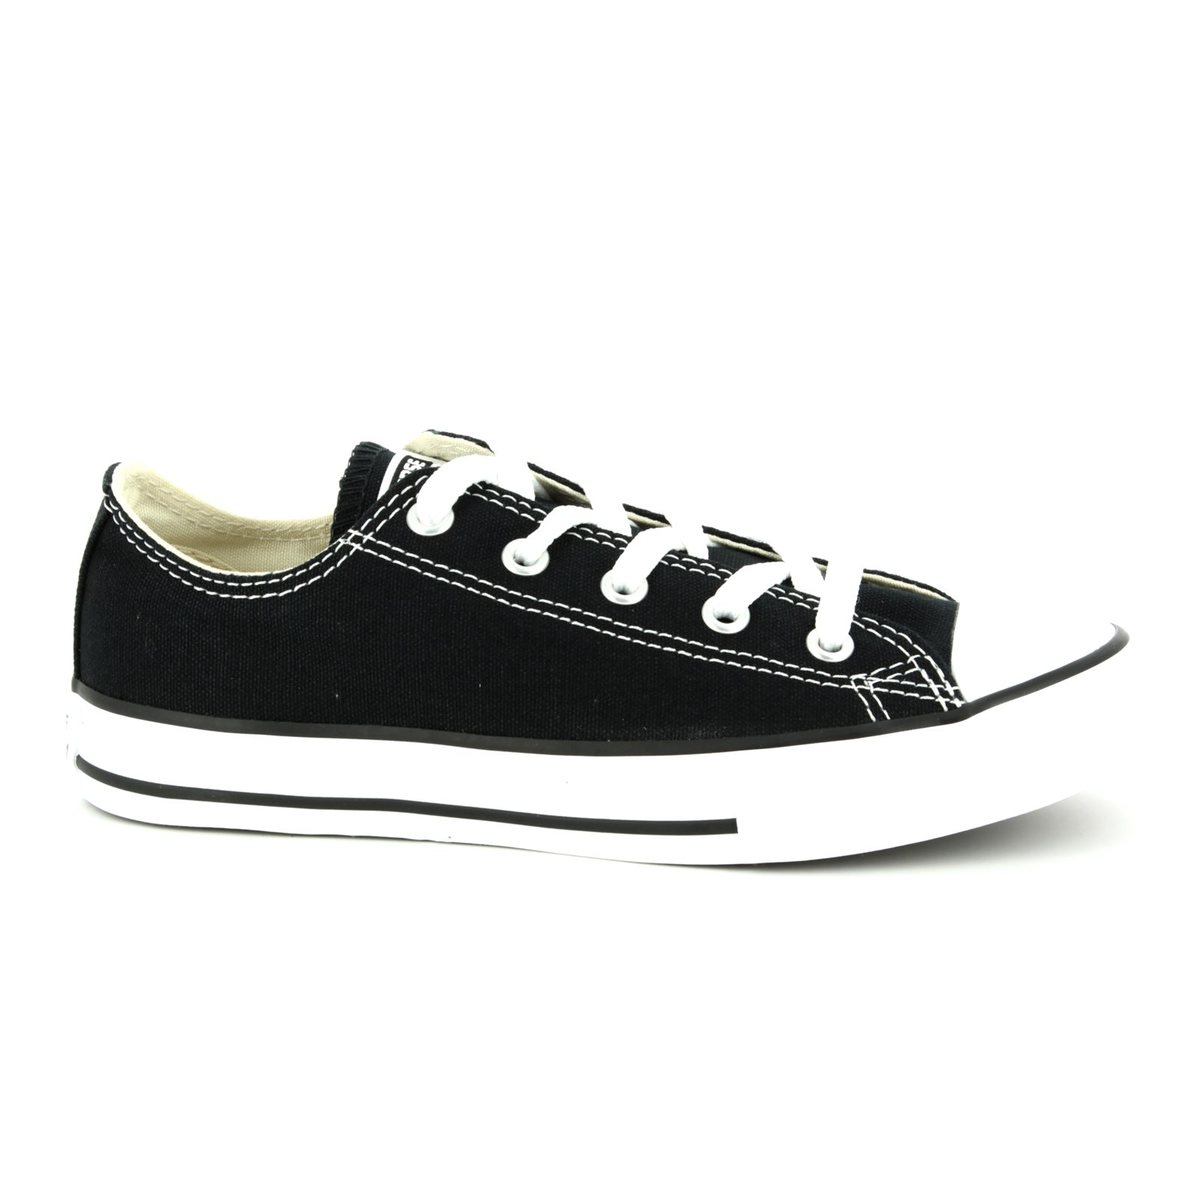 Converse 3J235C Childrens Chuck Taylor All Star OX Classic Black trainers